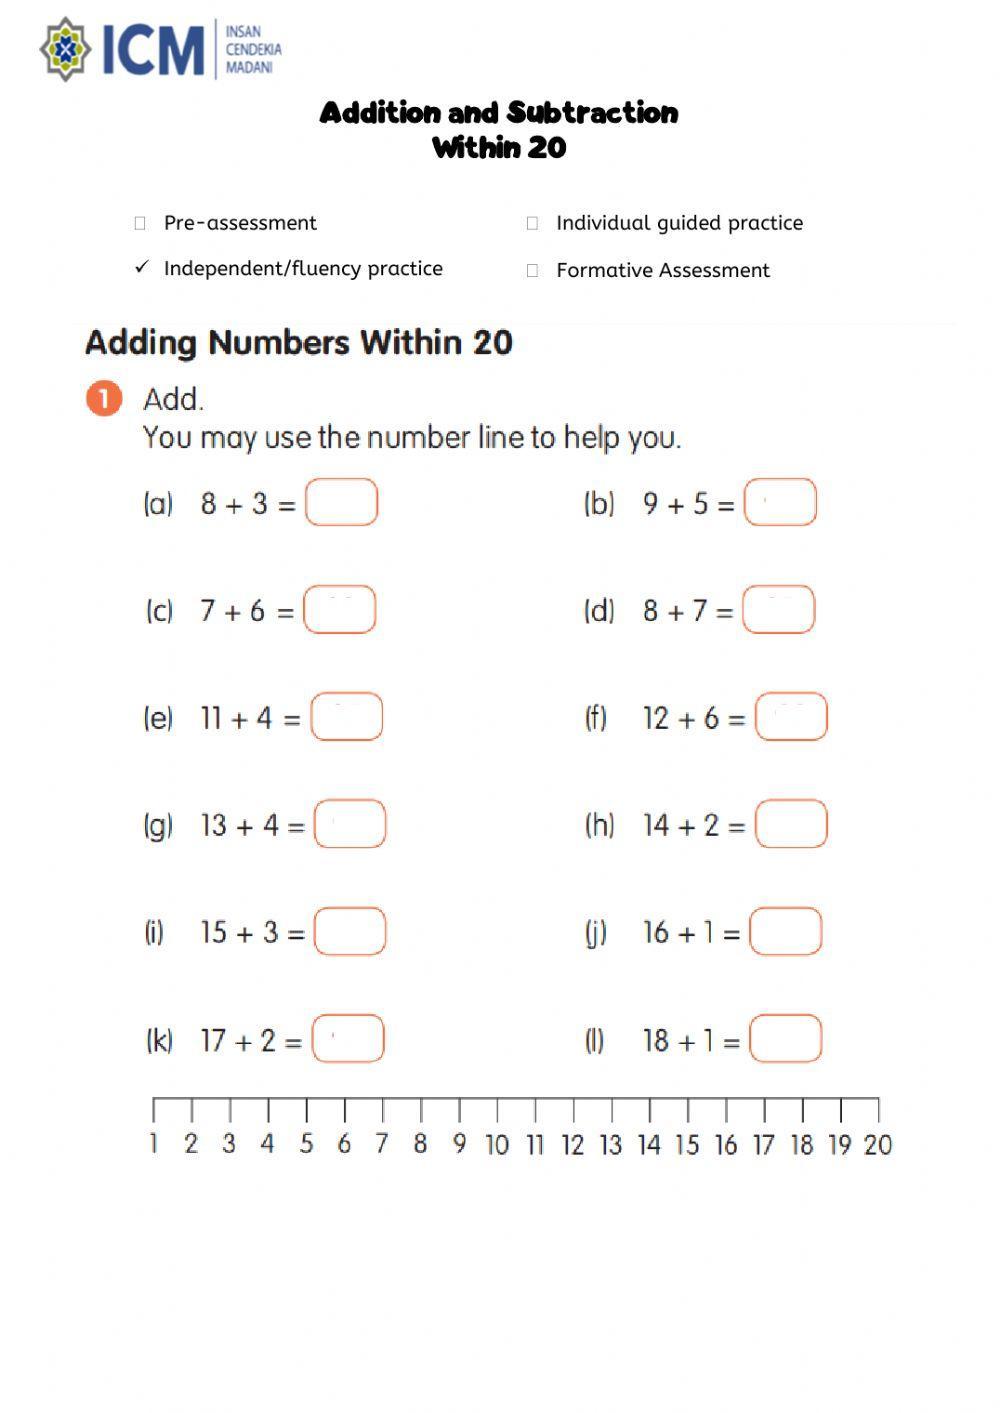 Addition and Subtraction Within 20